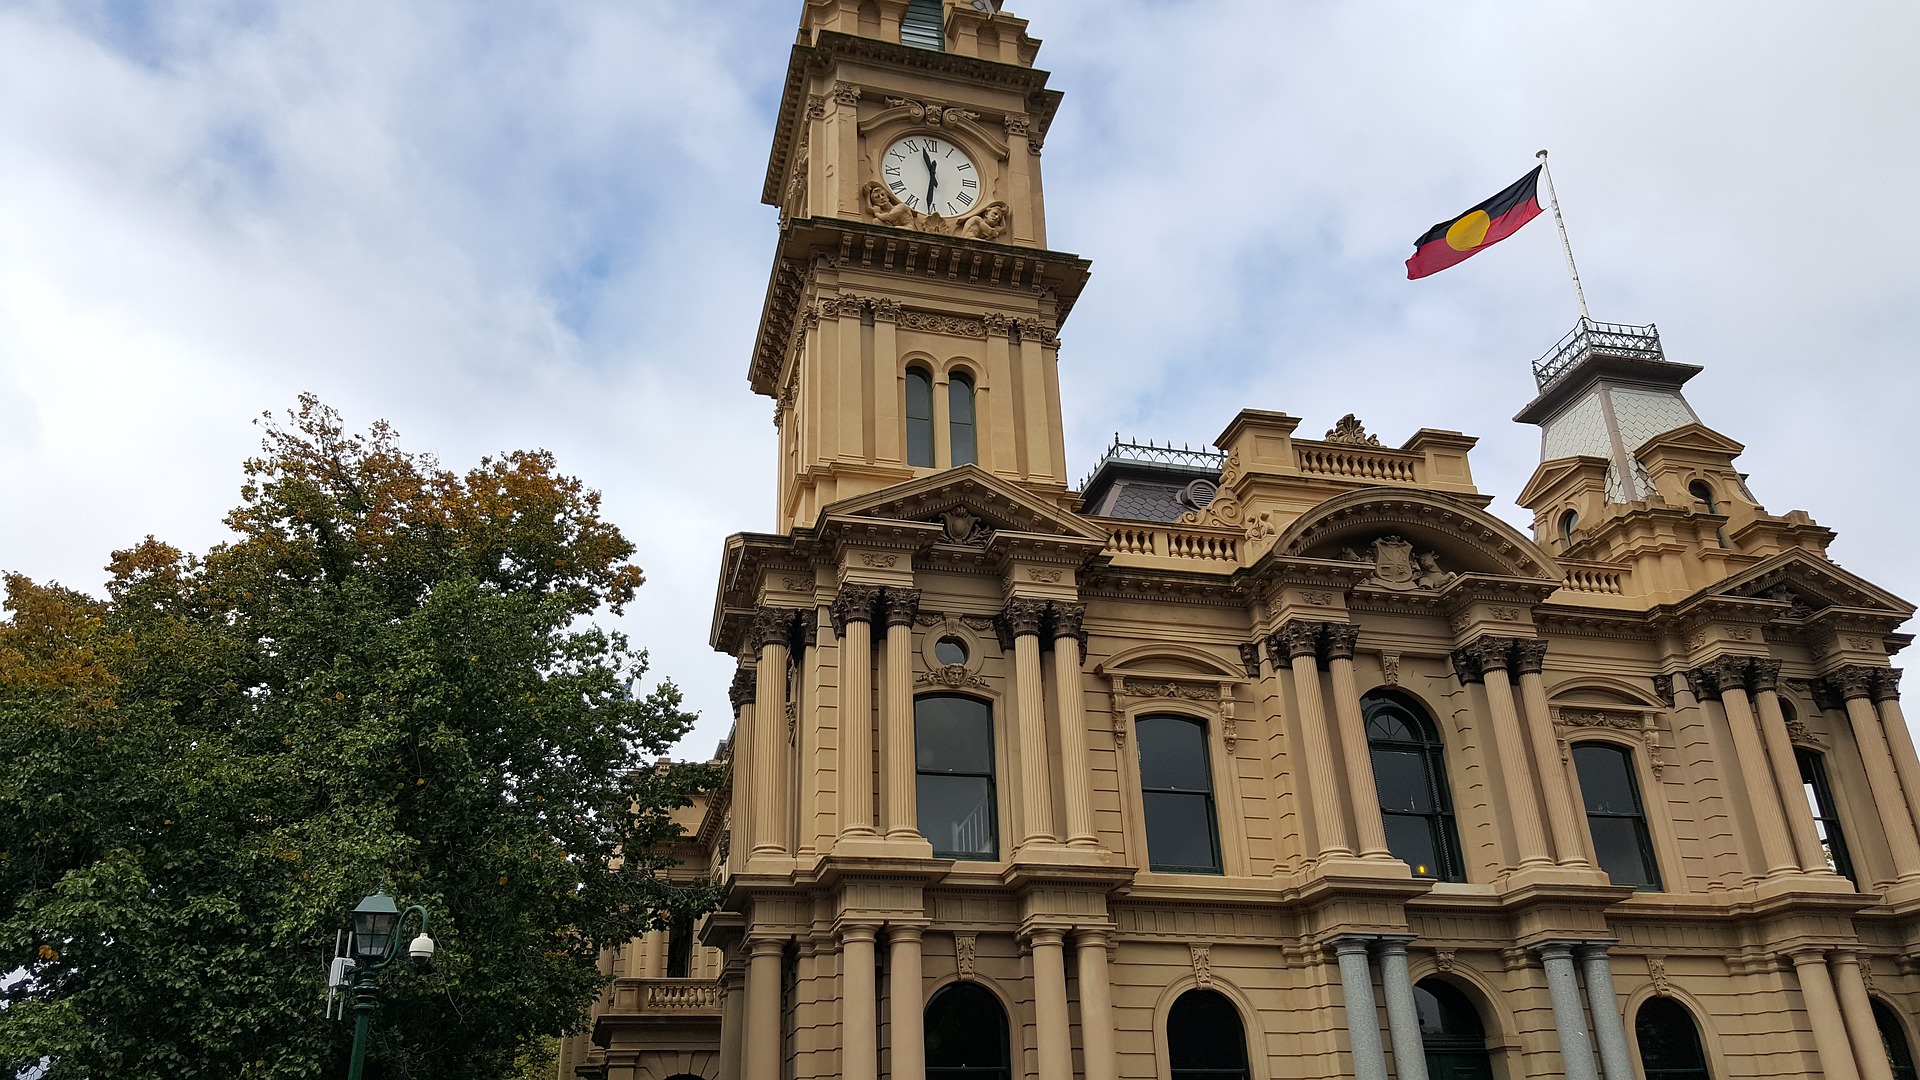 Melbourne town hall